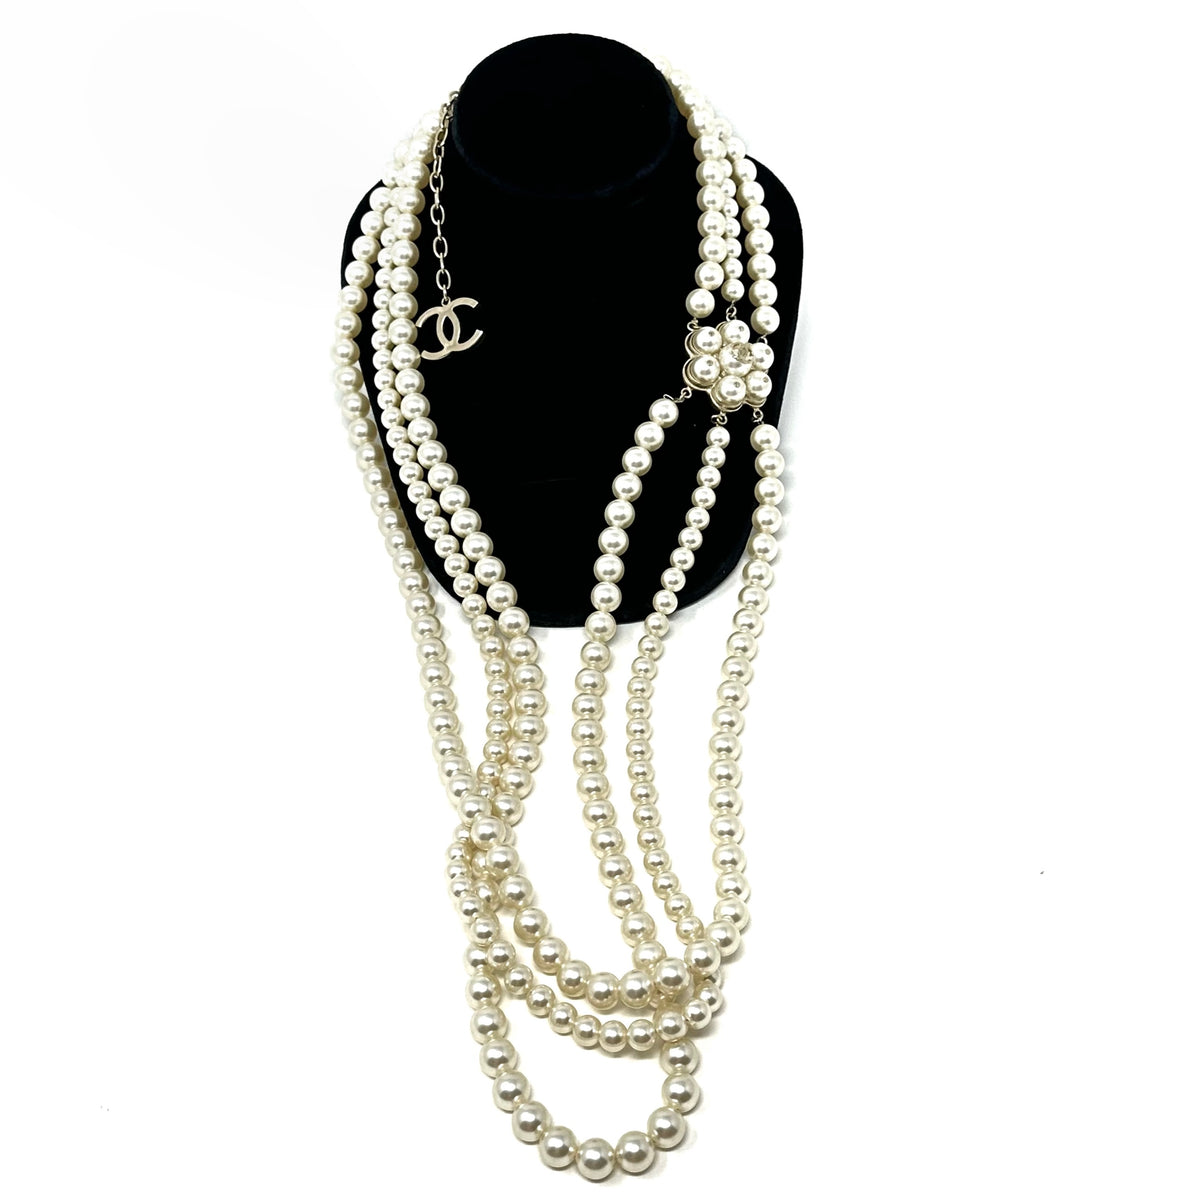 CHANEL Fall Winter 2015 3 Strand Pearl Gold CC Necklace – Jewelsunderthesea